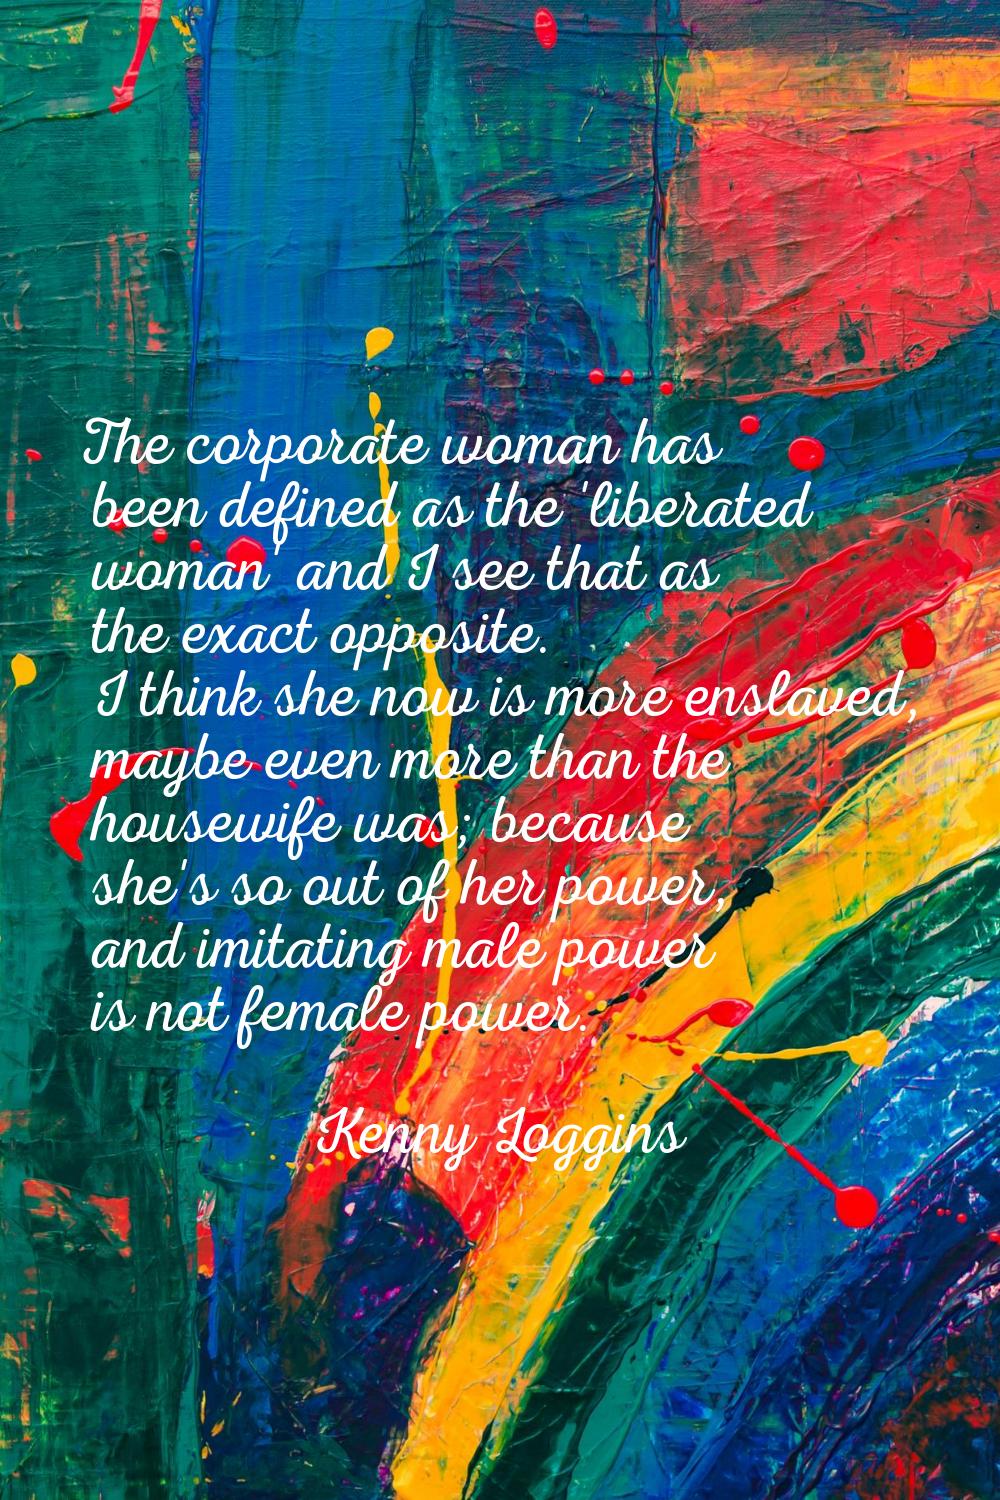 The corporate woman has been defined as the 'liberated woman' and I see that as the exact opposite.